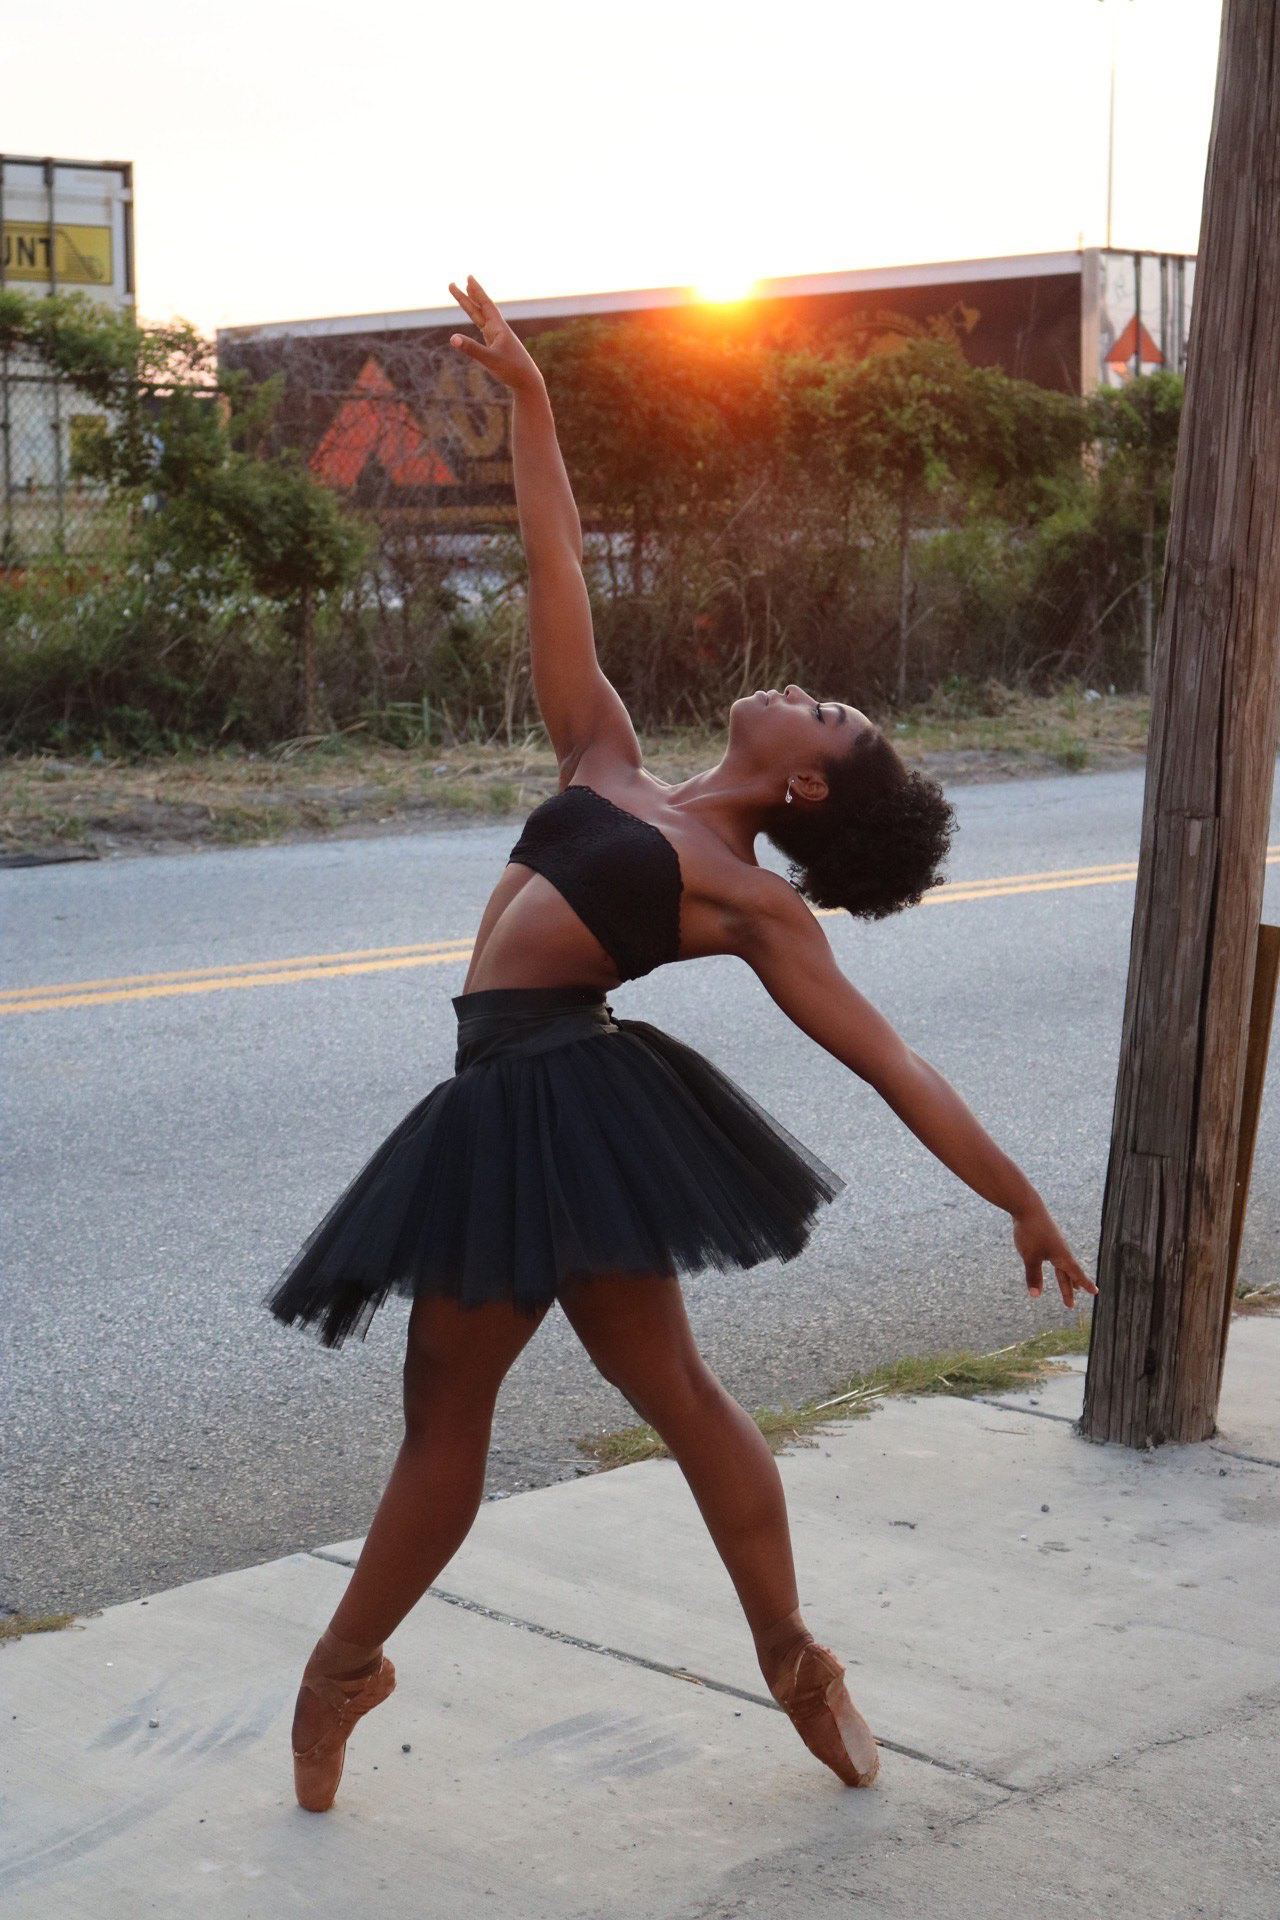 Ballerina's Viral Reaction to Getting Pointe Shoes that Match Her Skin Tone